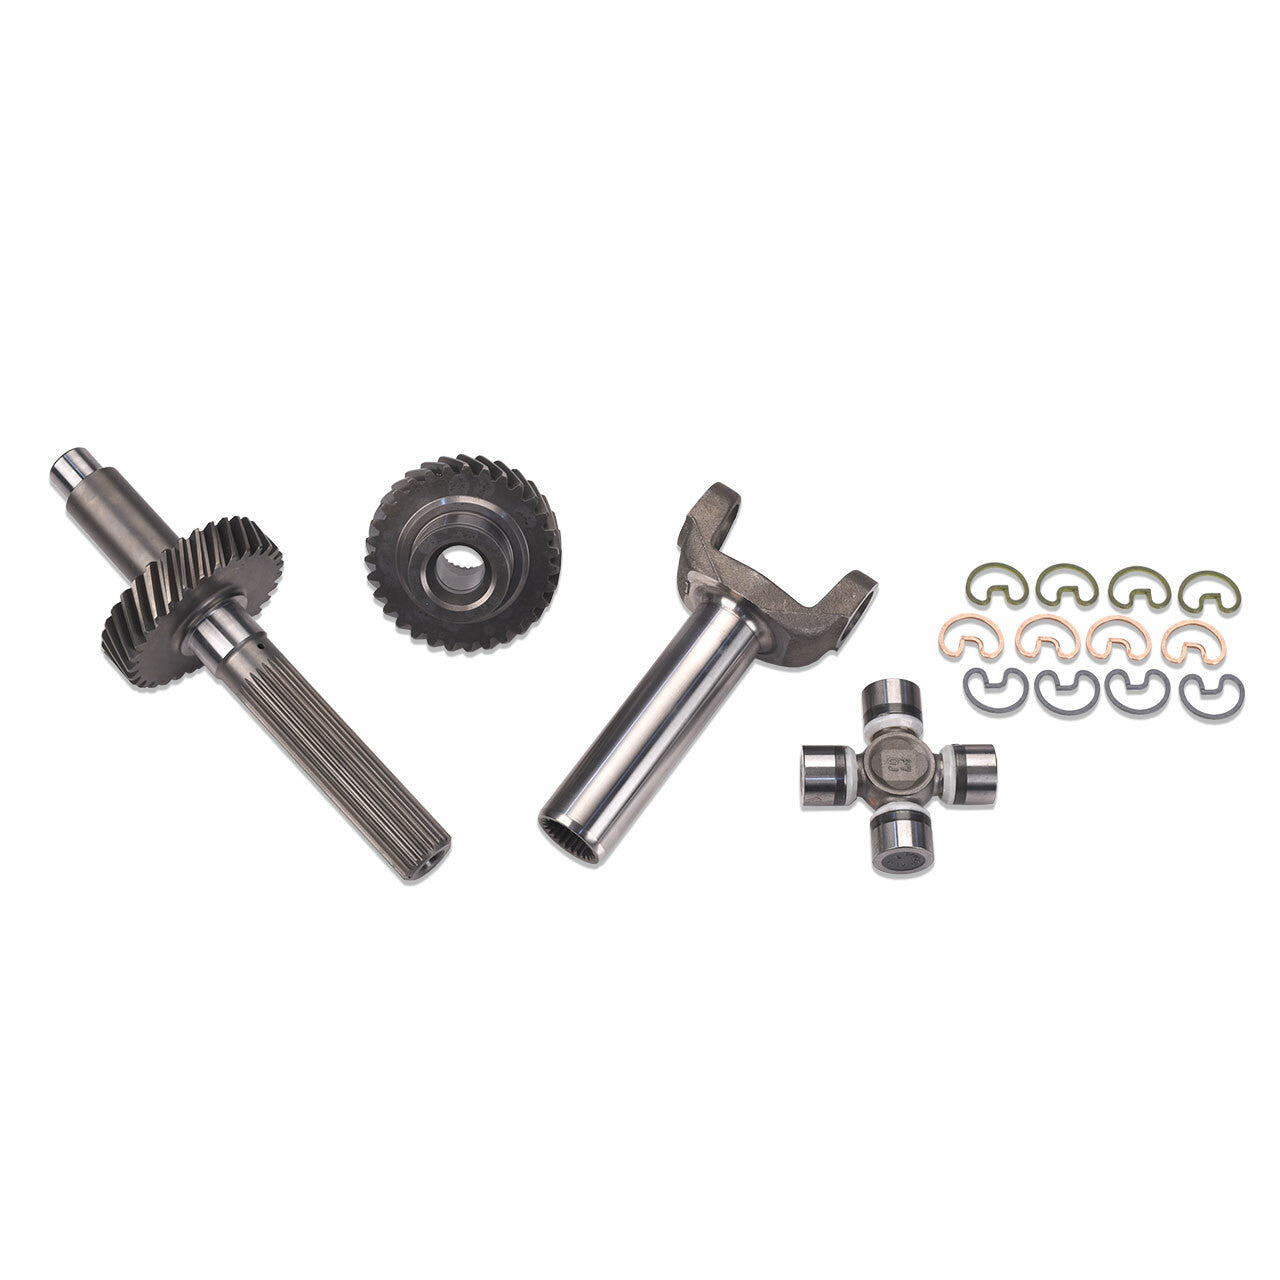 IAG Performance Chromoly Transfer Gears For 1:1 Transmission (04-05 6-Speed STI) - Dirty Racing Products